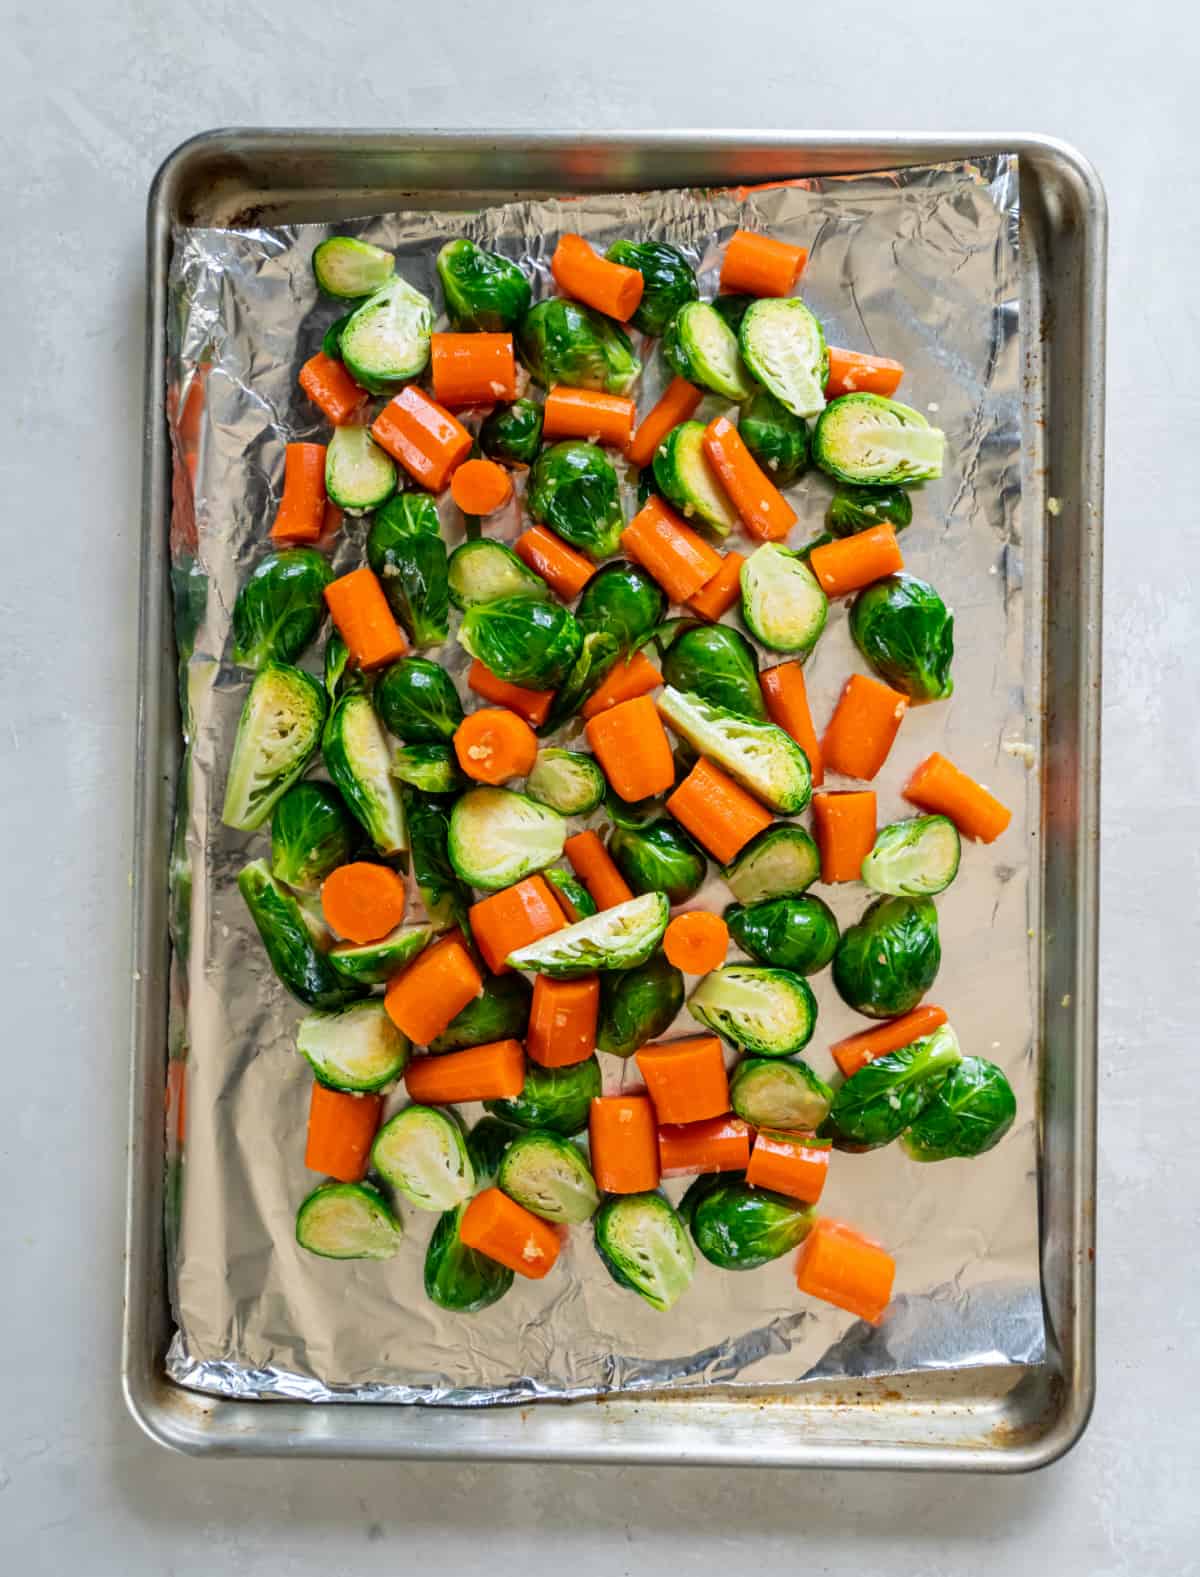 Brussels sprouts and carrots on a sheet pan with olive oil, garlic, salt, pepper, and red pepper flakes. The pan is sitting on a white countertop before going into the oven.